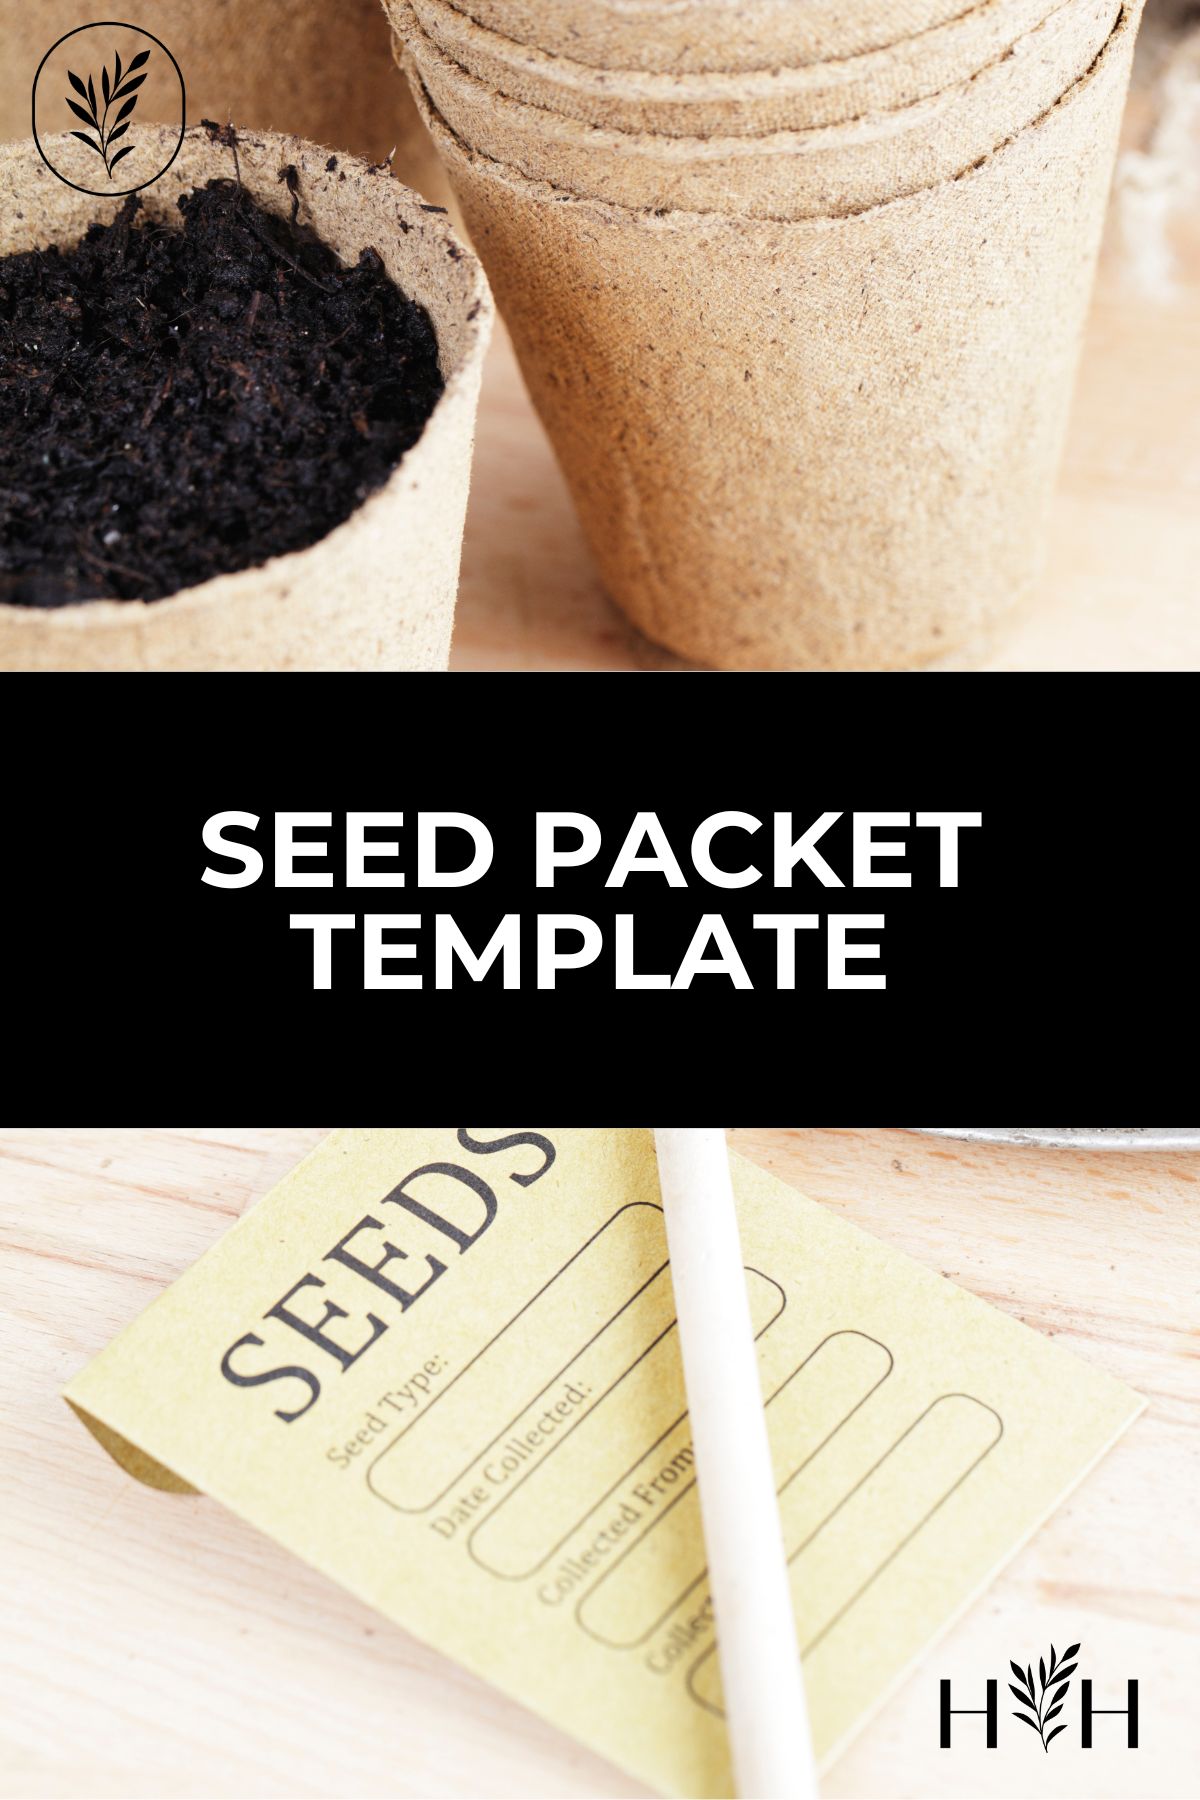 Seed packet template (printable pdf and instructions) via @home4theharvest